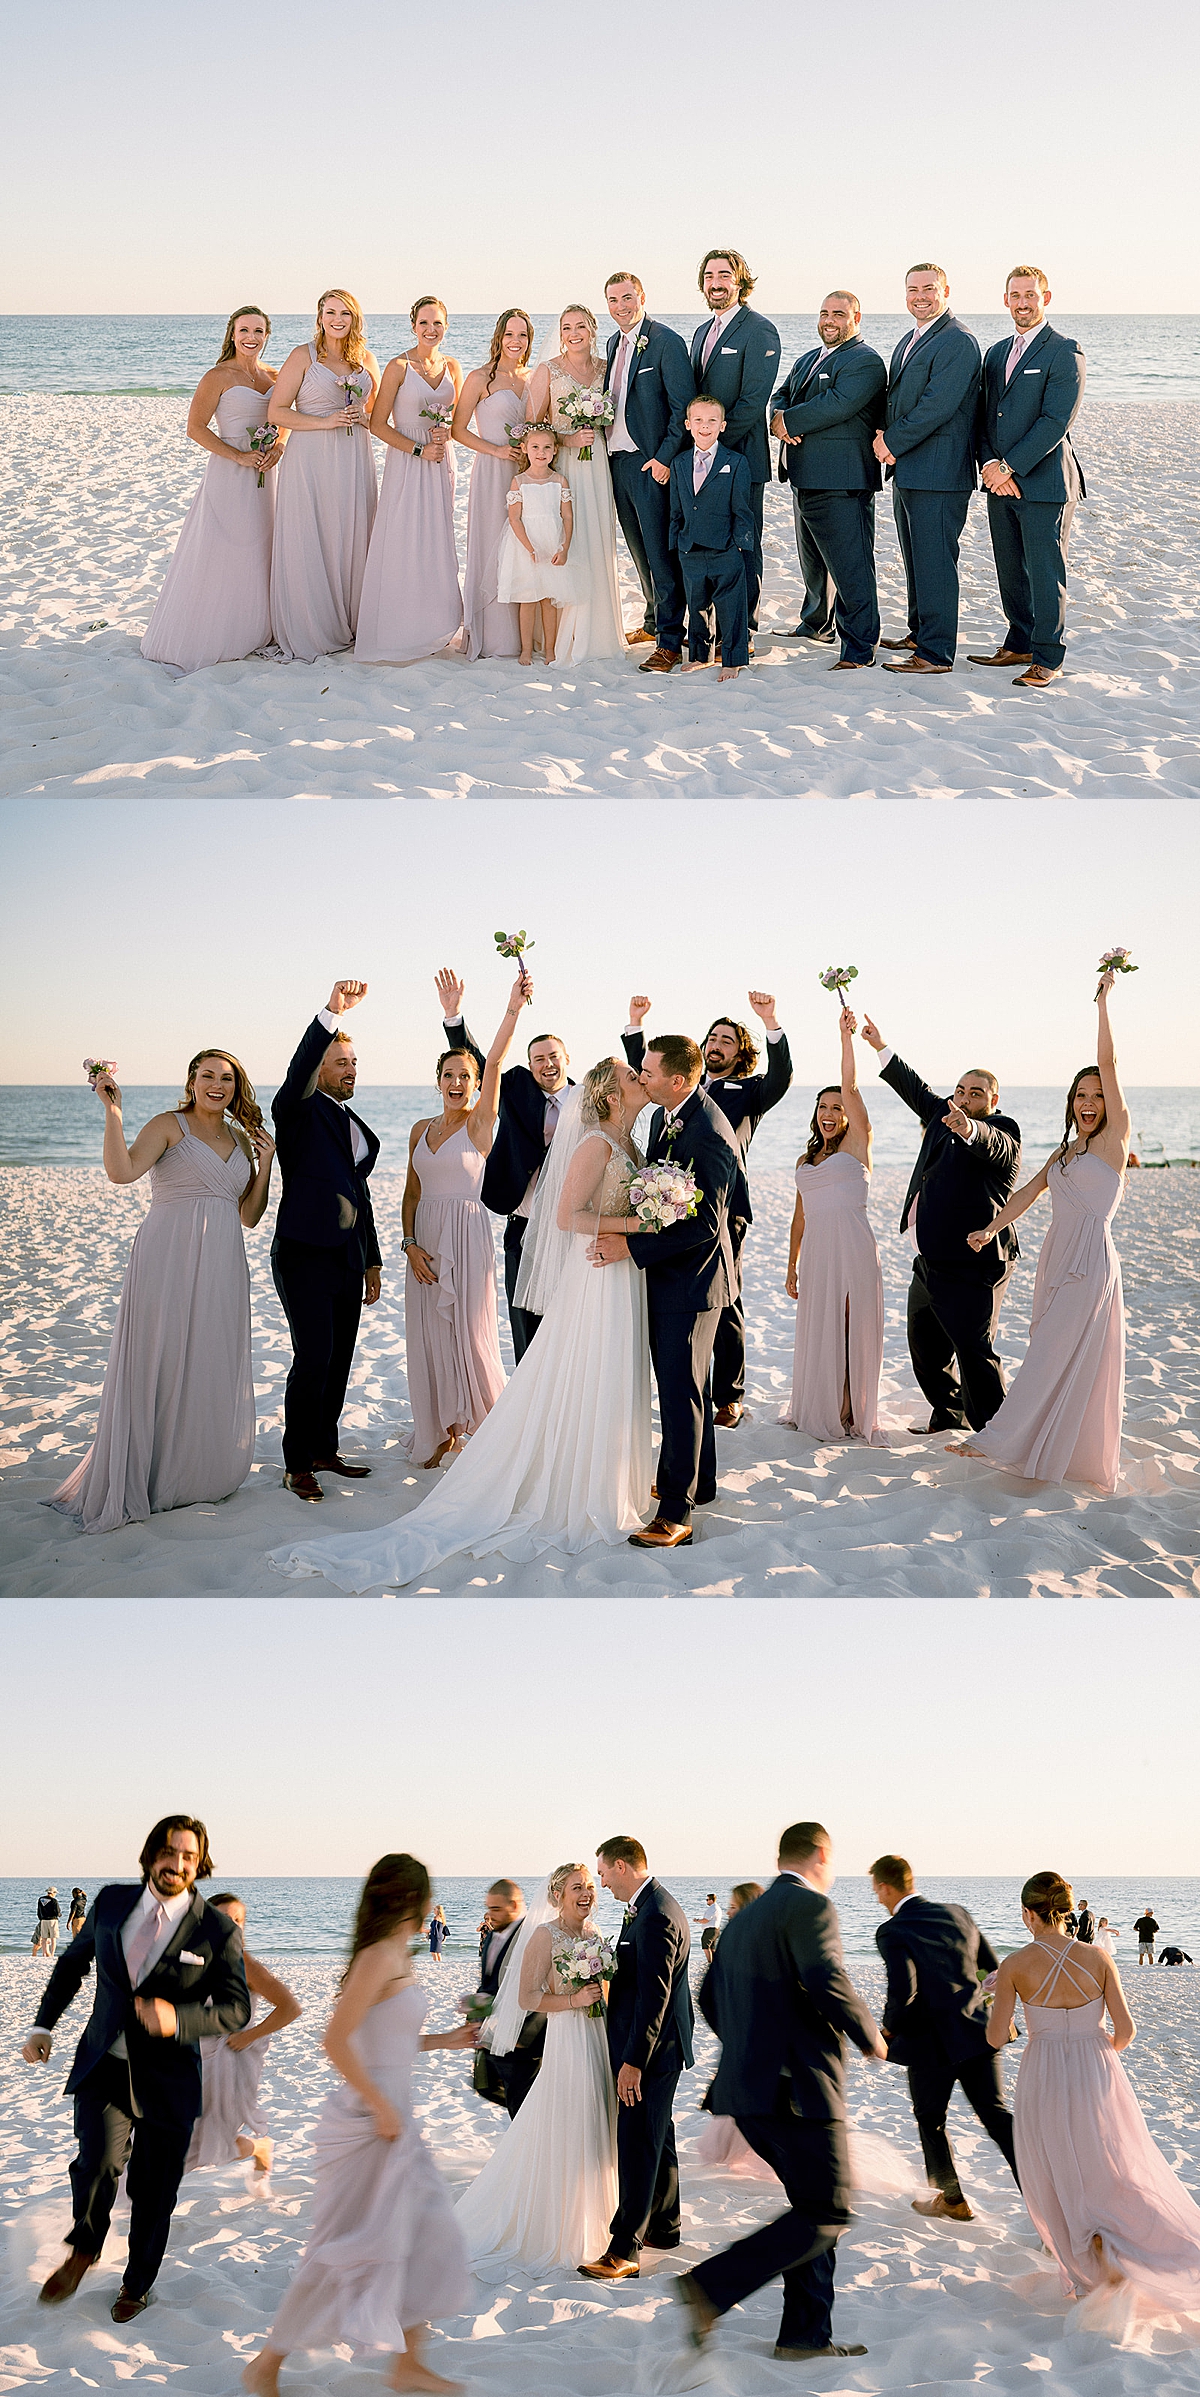 bride and groom with wedding party on the beach at sunset by Emily burns photo 